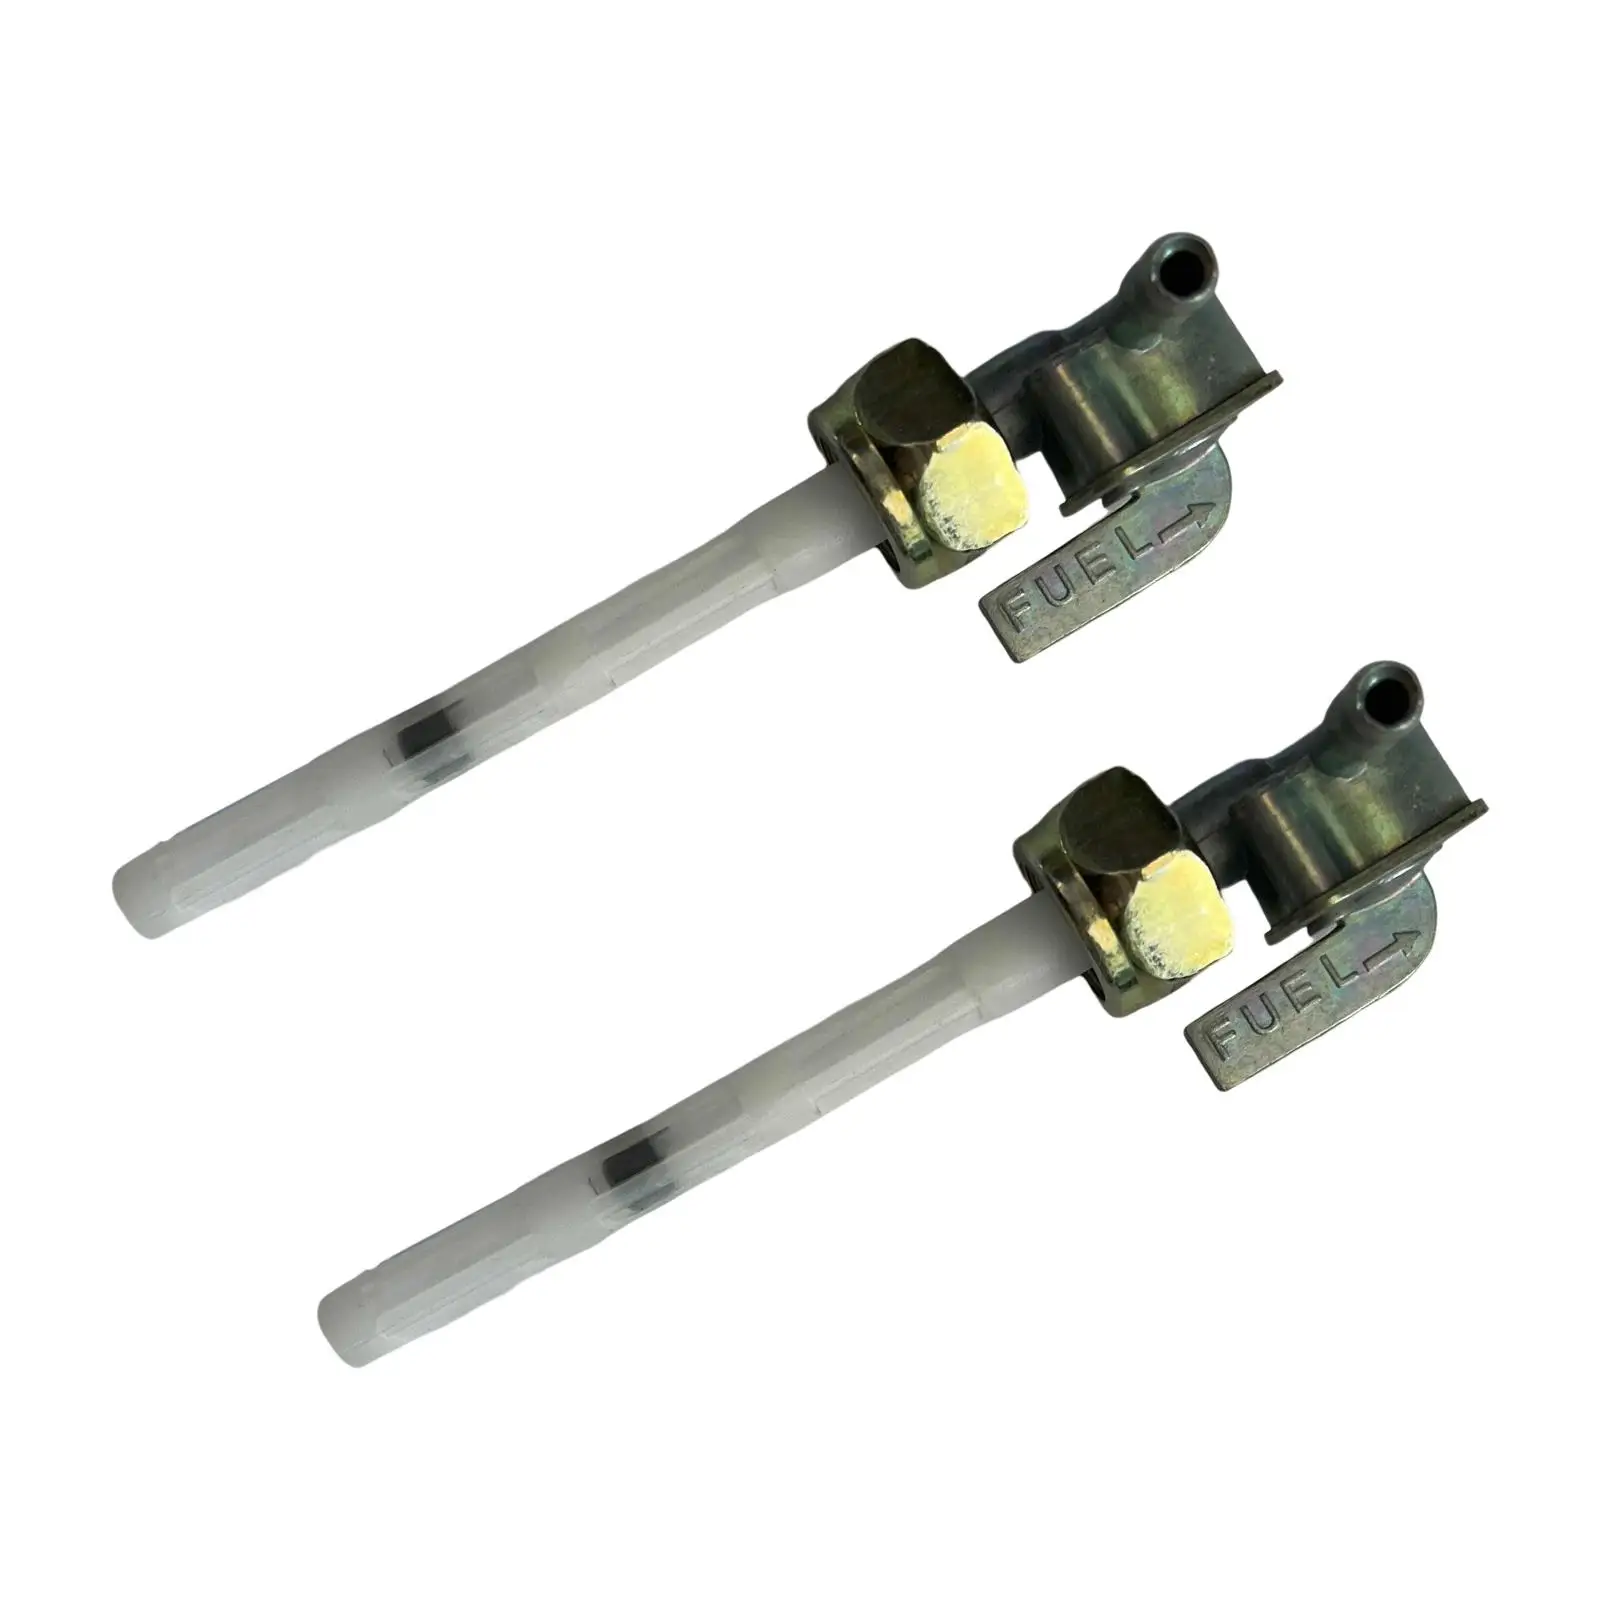 2X Motorcycle Fuel Gas Tank Petcock Valve Switch for  CG125 125CC